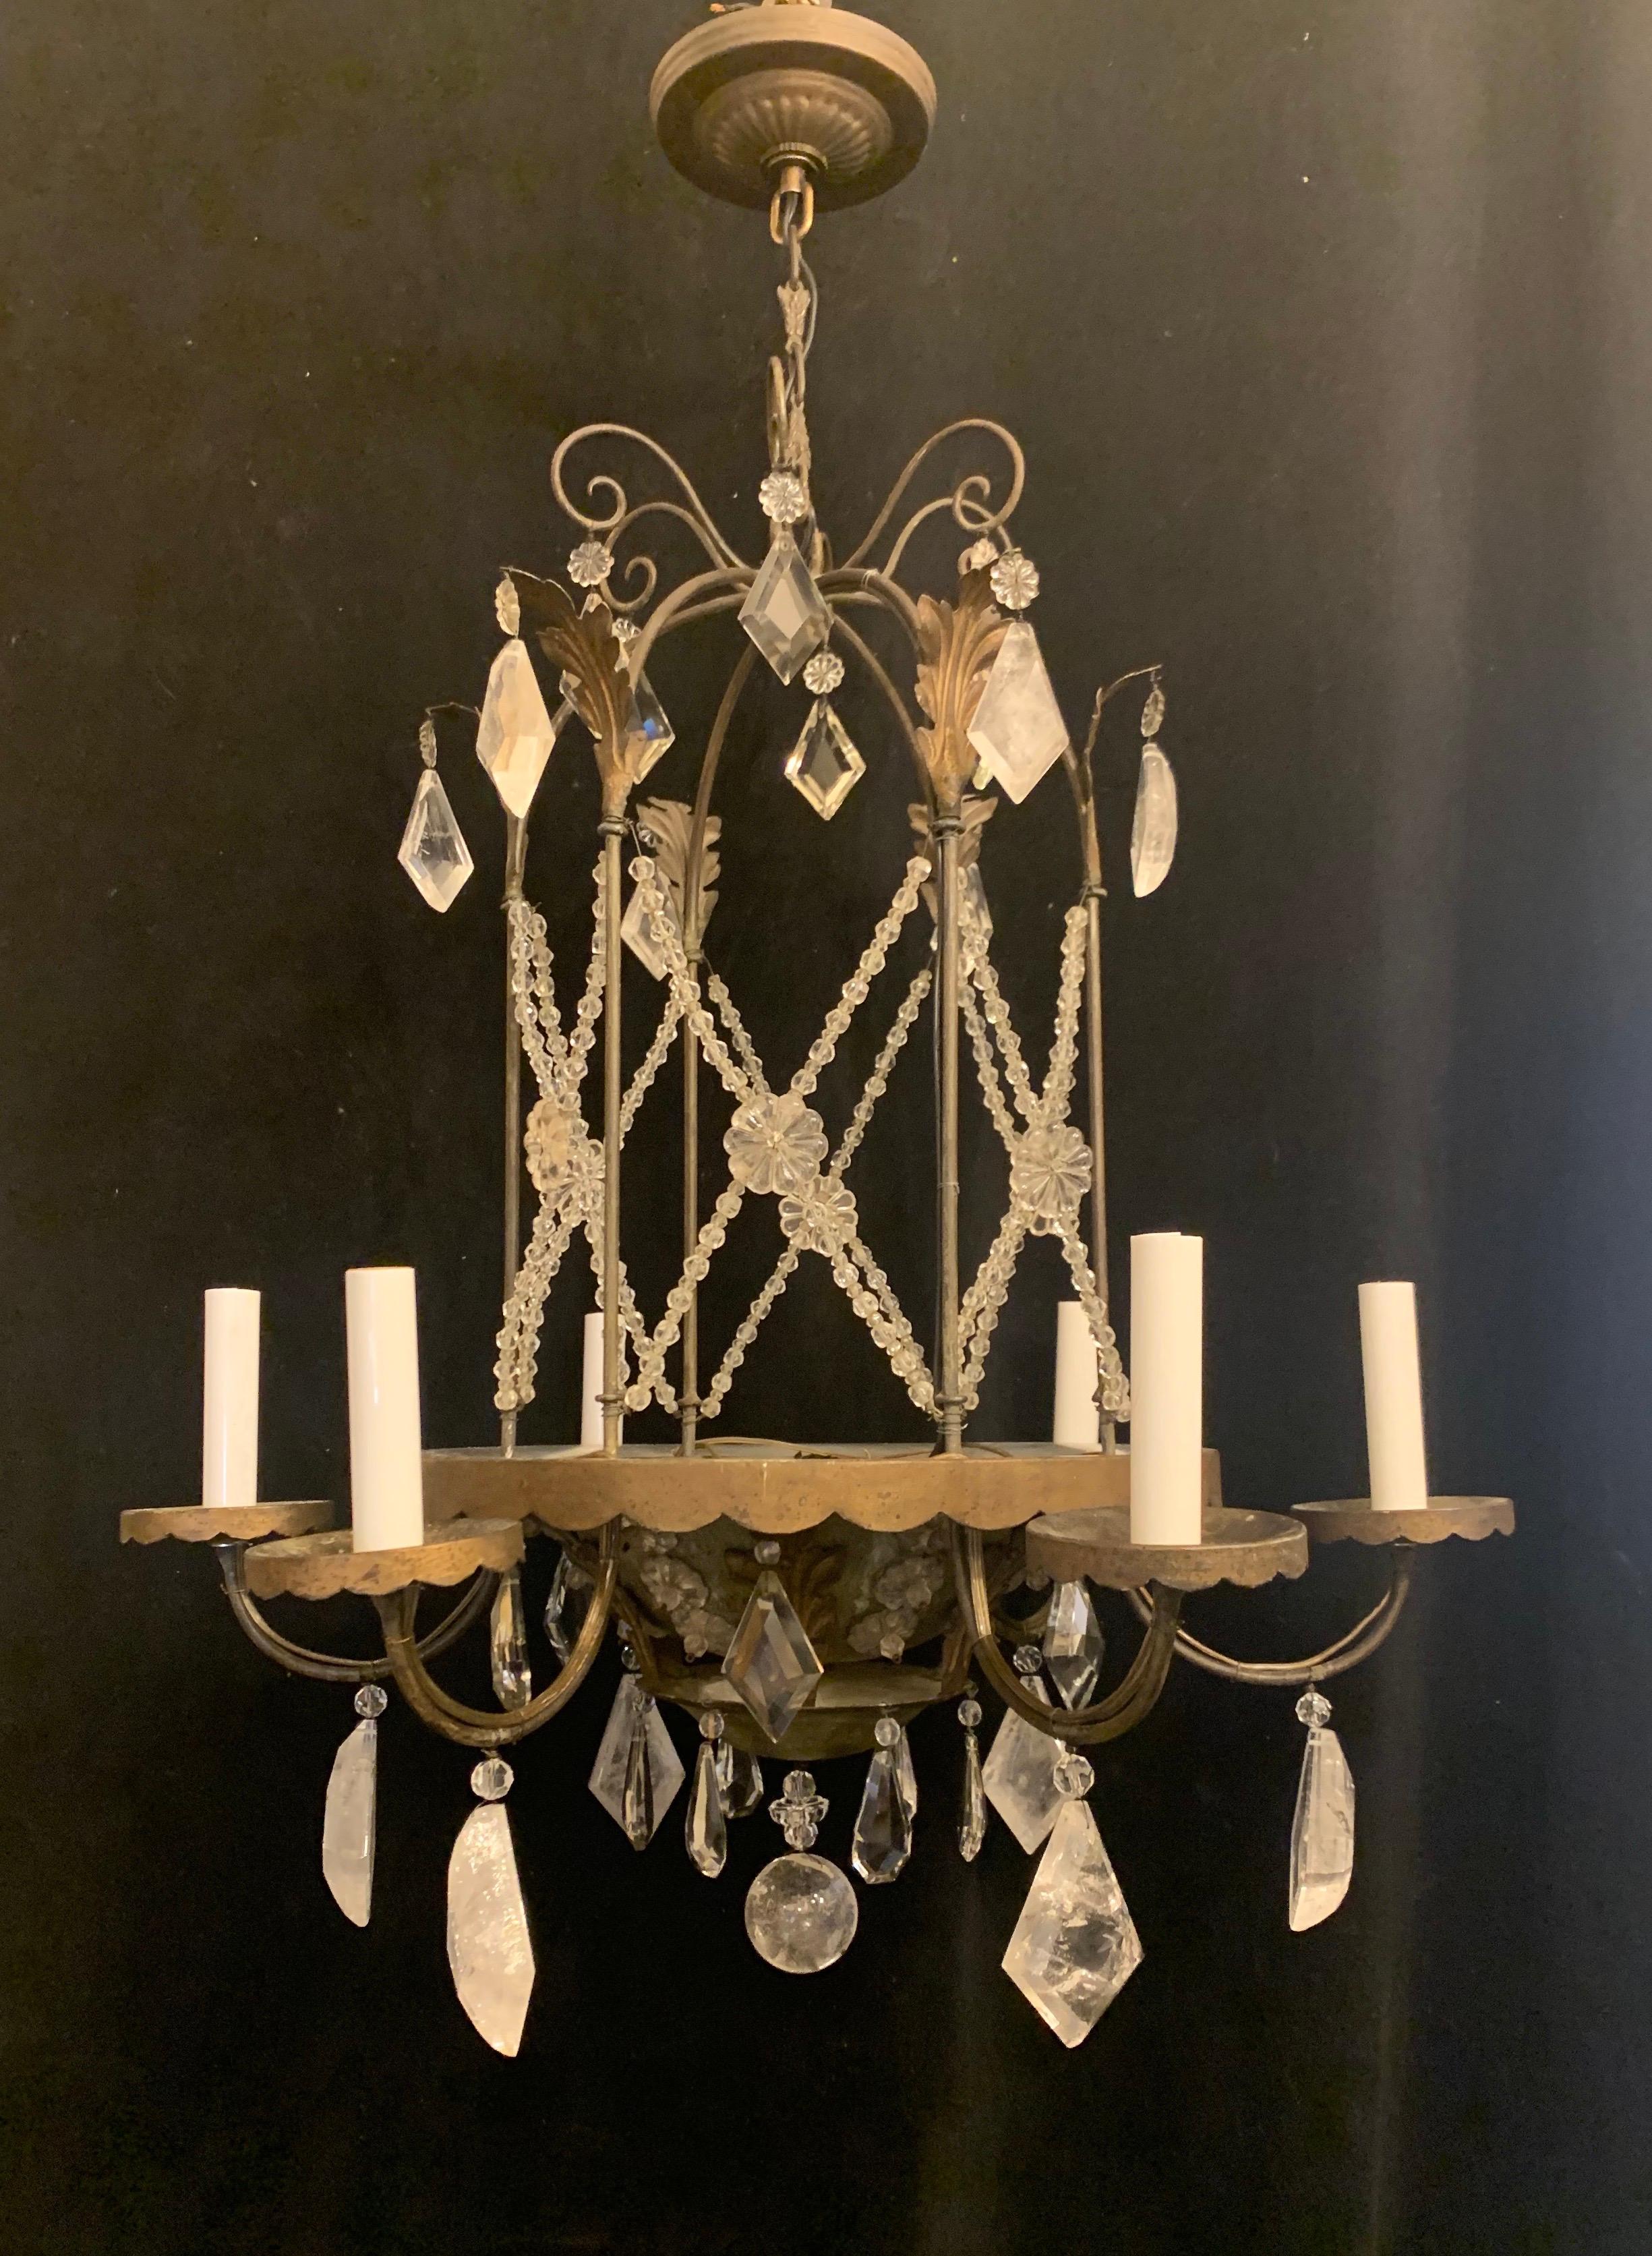 A wonderful vintage Maison Baguès style green tole with rock crystals and beads and flowers 6 arm chandelier with two lights on the inside, rewired and ready to enjoy with chain canopy and mounting hardware included.